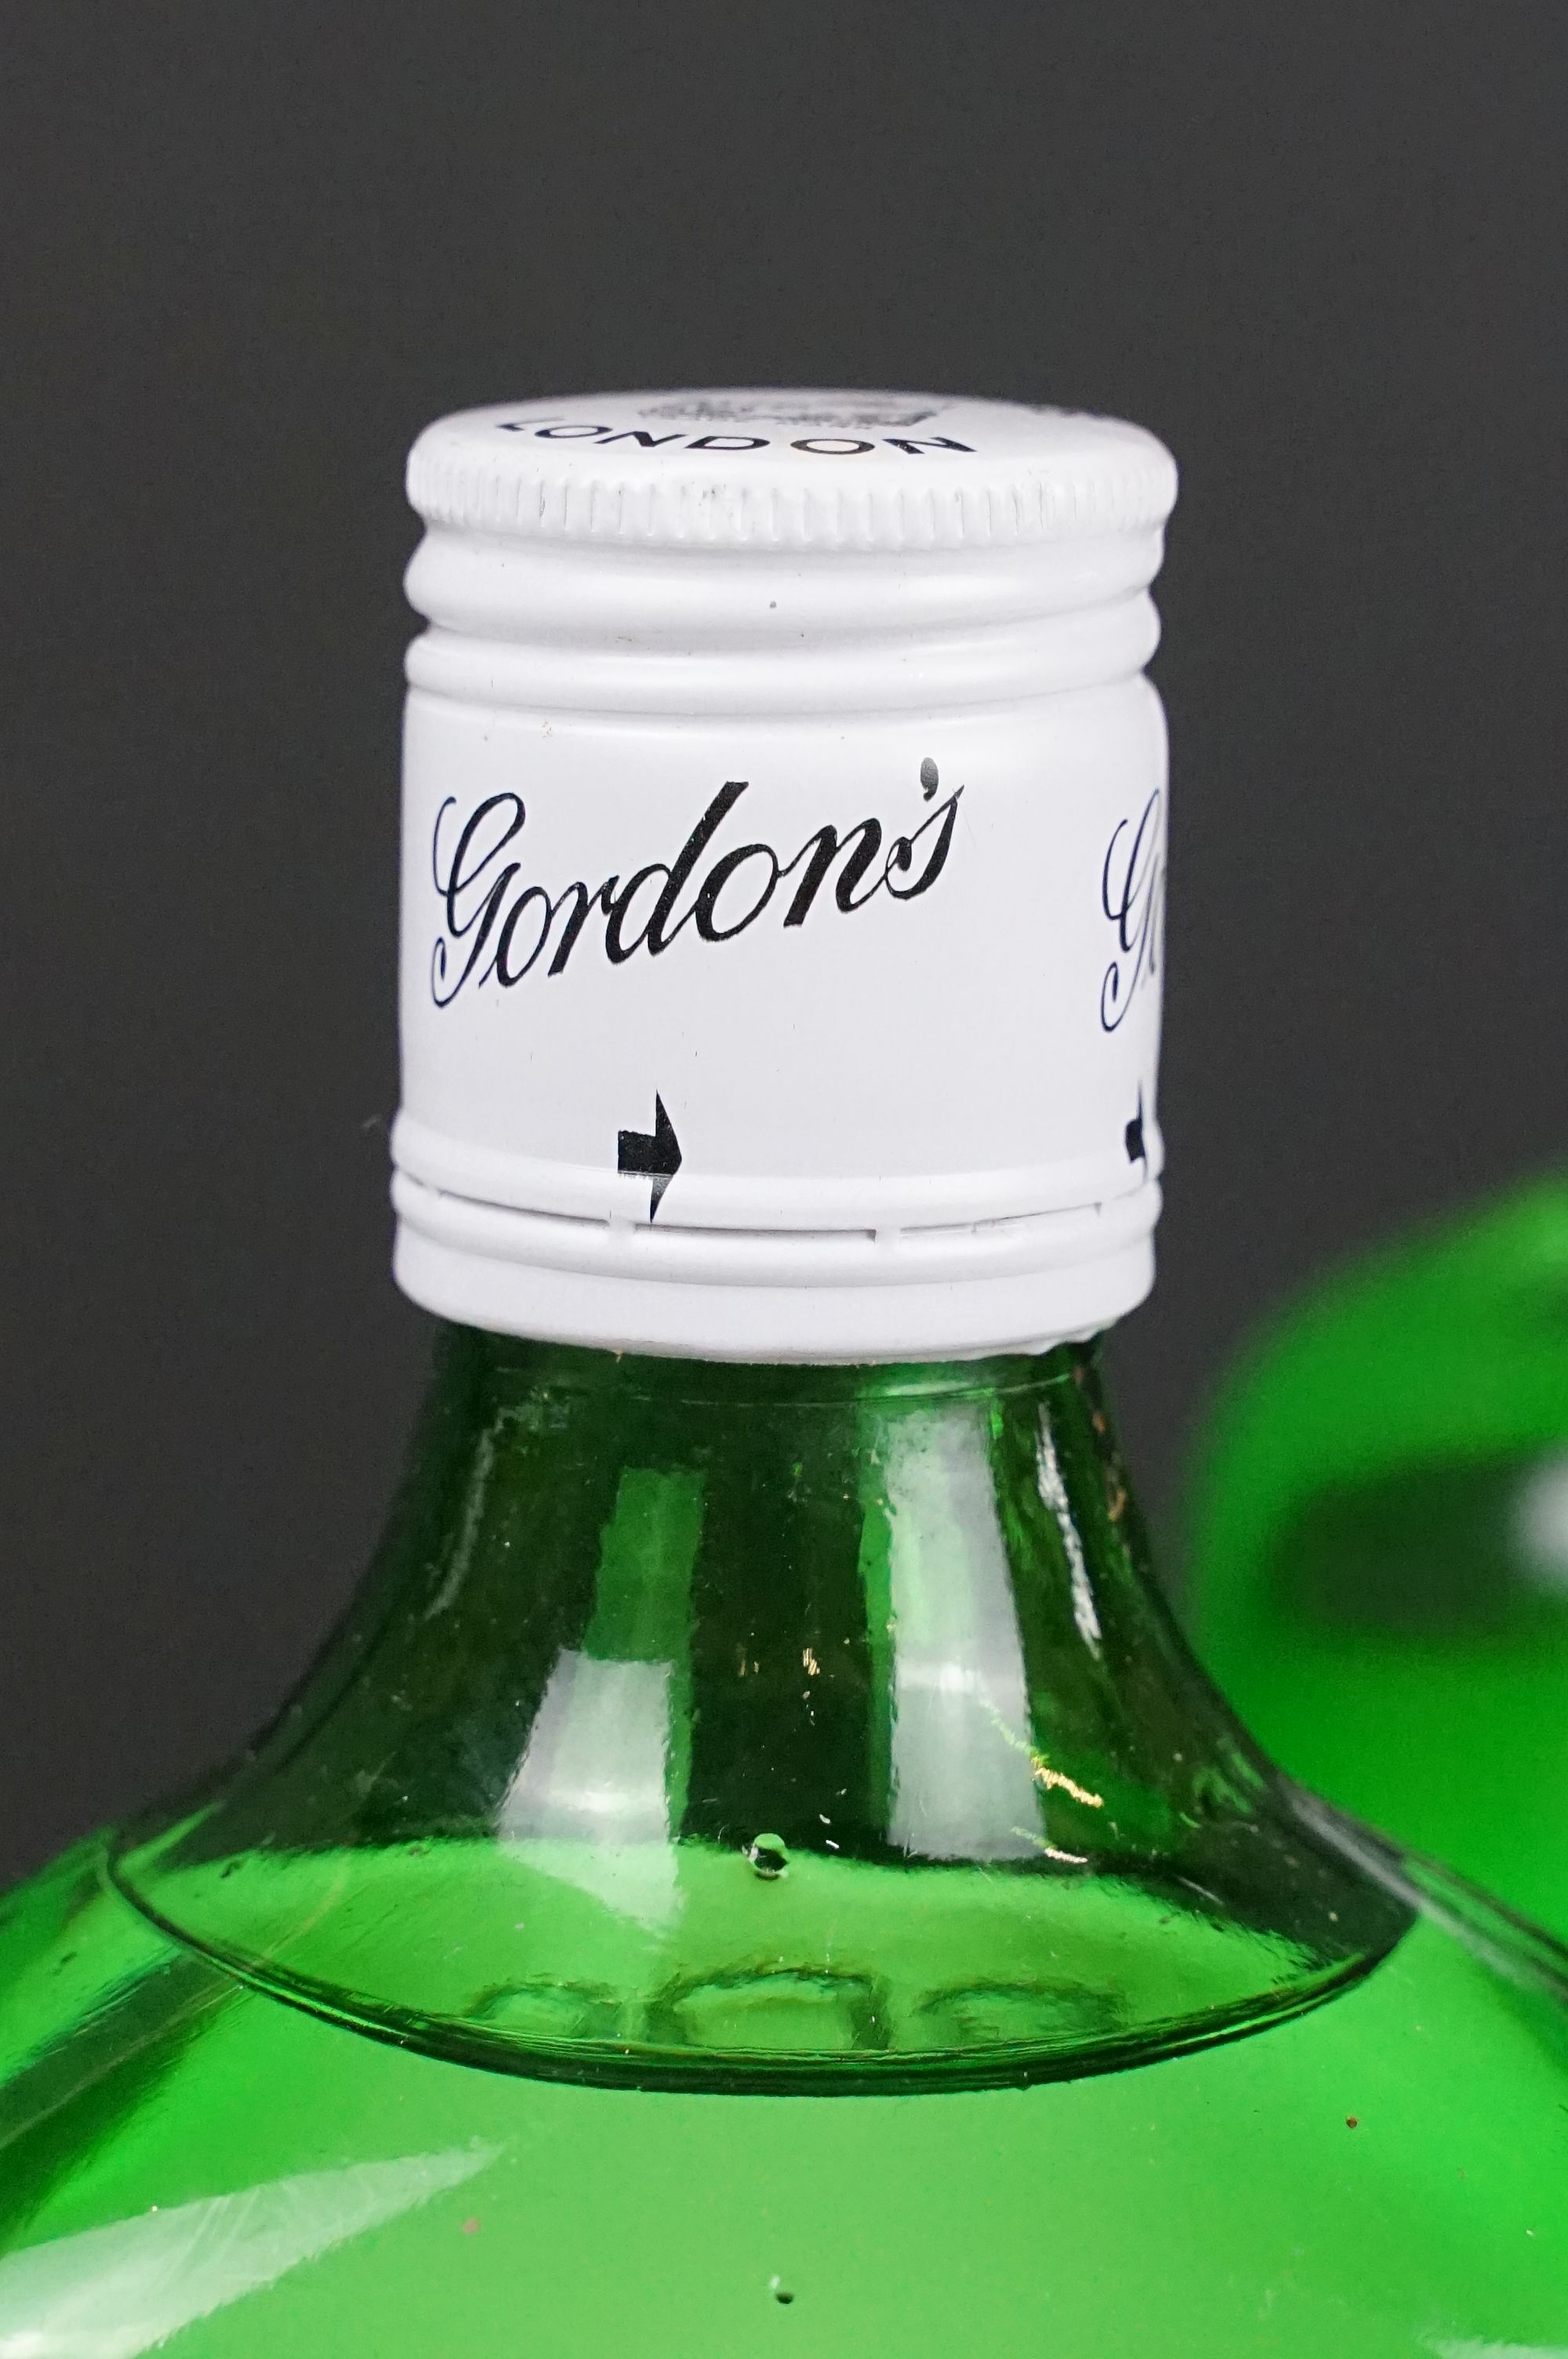 Two bottles of Gordon's Special Dry London Gin, each contains 26 2/3 FL. OZS - Image 4 of 4